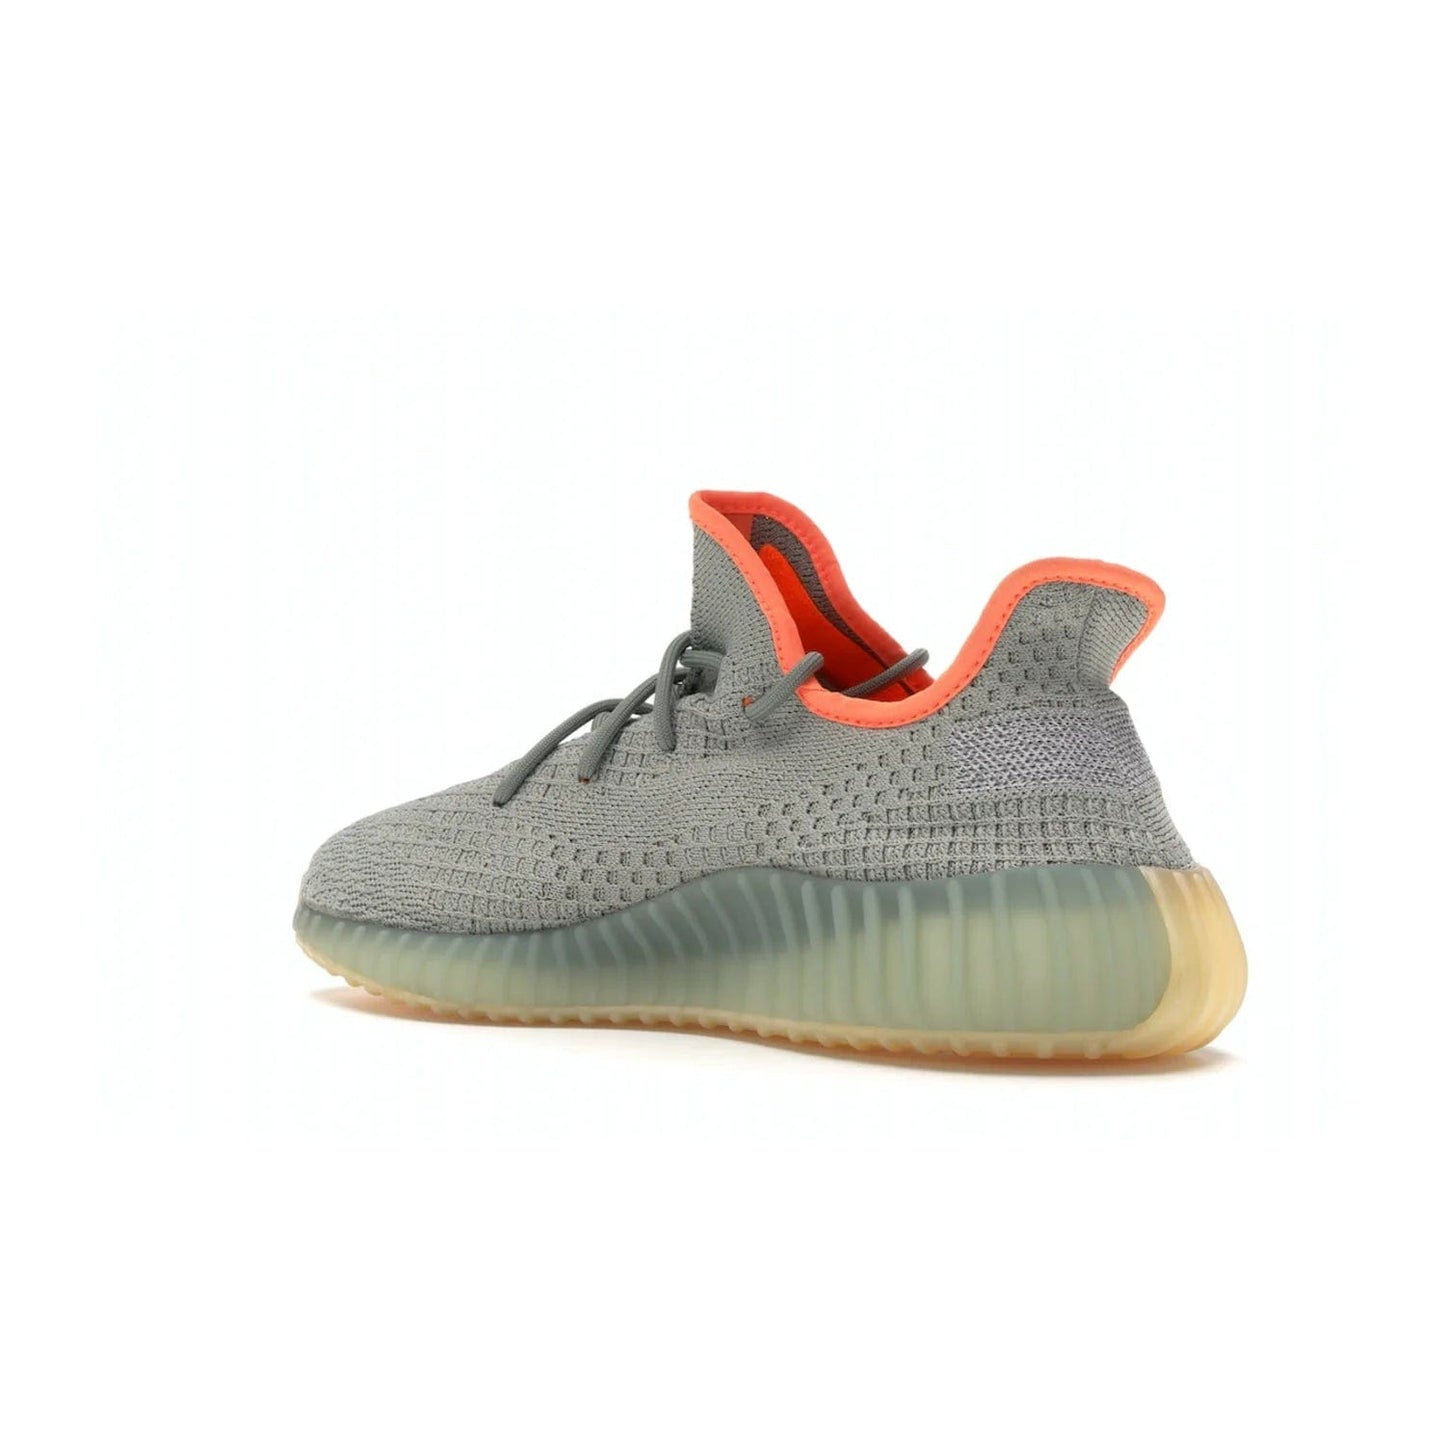 adidas Yeezy Boost 350 V2 Desert Sage - Image 23 - Only at www.BallersClubKickz.com - Upgrade your style with the adidas Yeezy Boost 350 V2 Desert Sage. This 350V2 features a Desert Sage primeknit upper with tonal side stripe, and an orange-highlighted translucent Boost cushioning sole. Stay on-trend in effortless style.